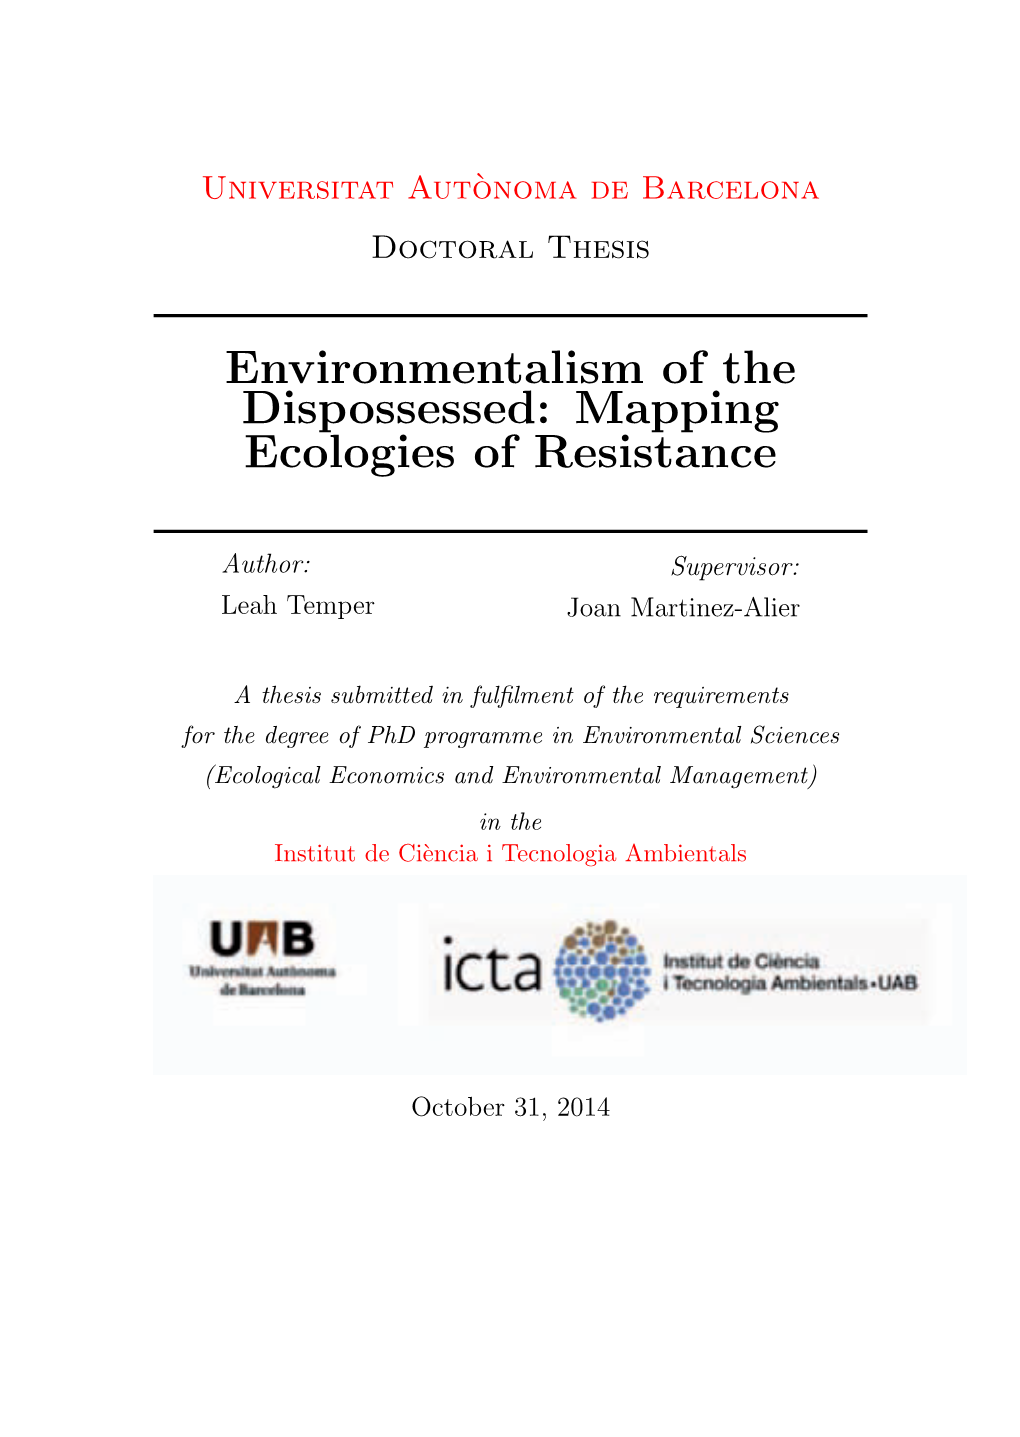 Environmentalism of the Dispossessed: Mapping Ecologies of Resistance